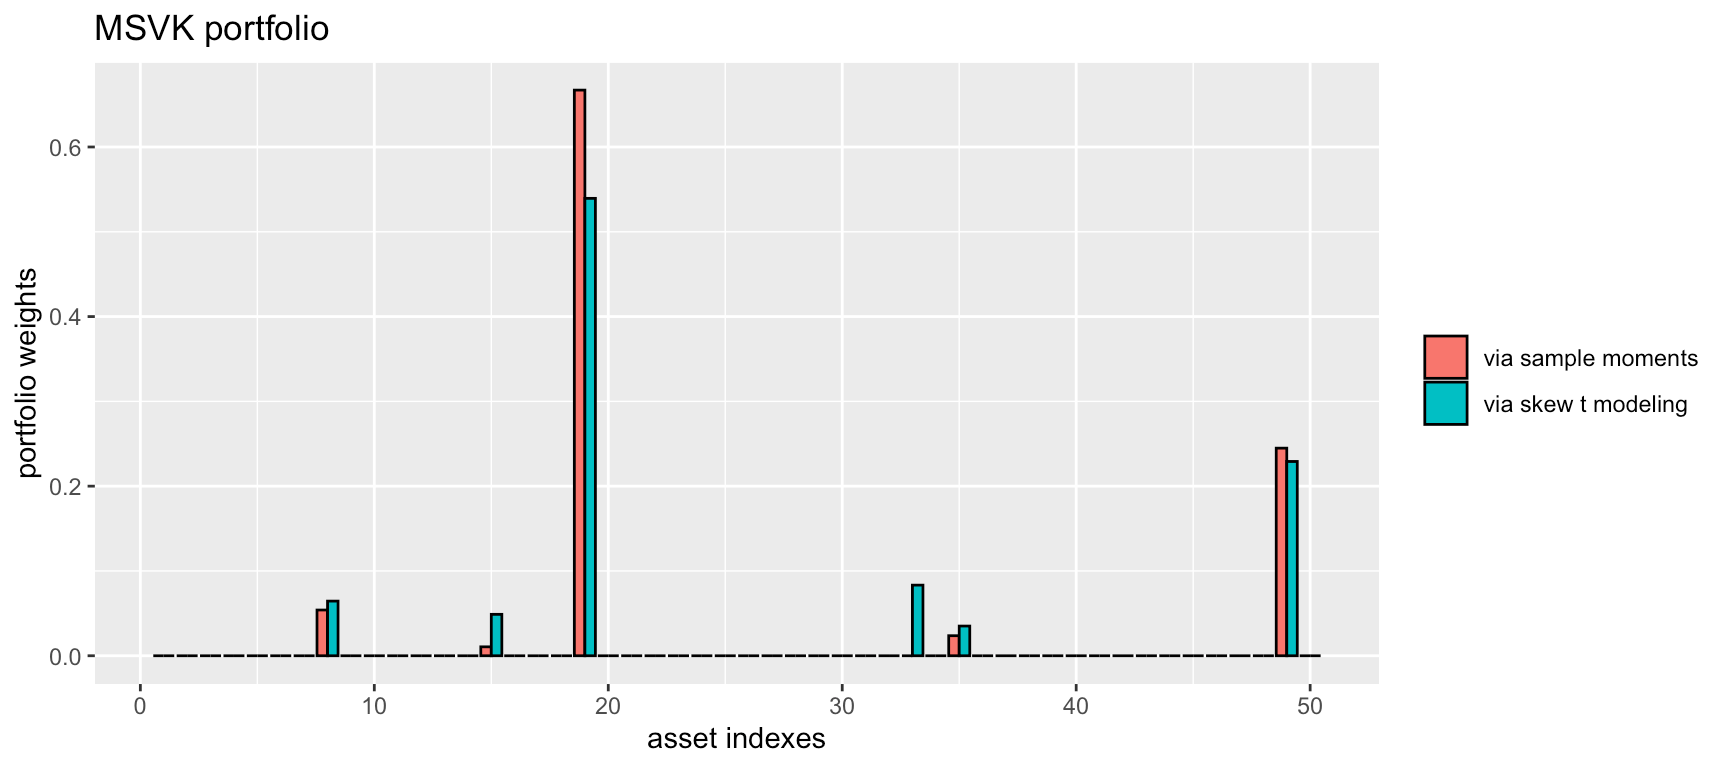 Plot of portfolio weights vs. asset indexes for two methods